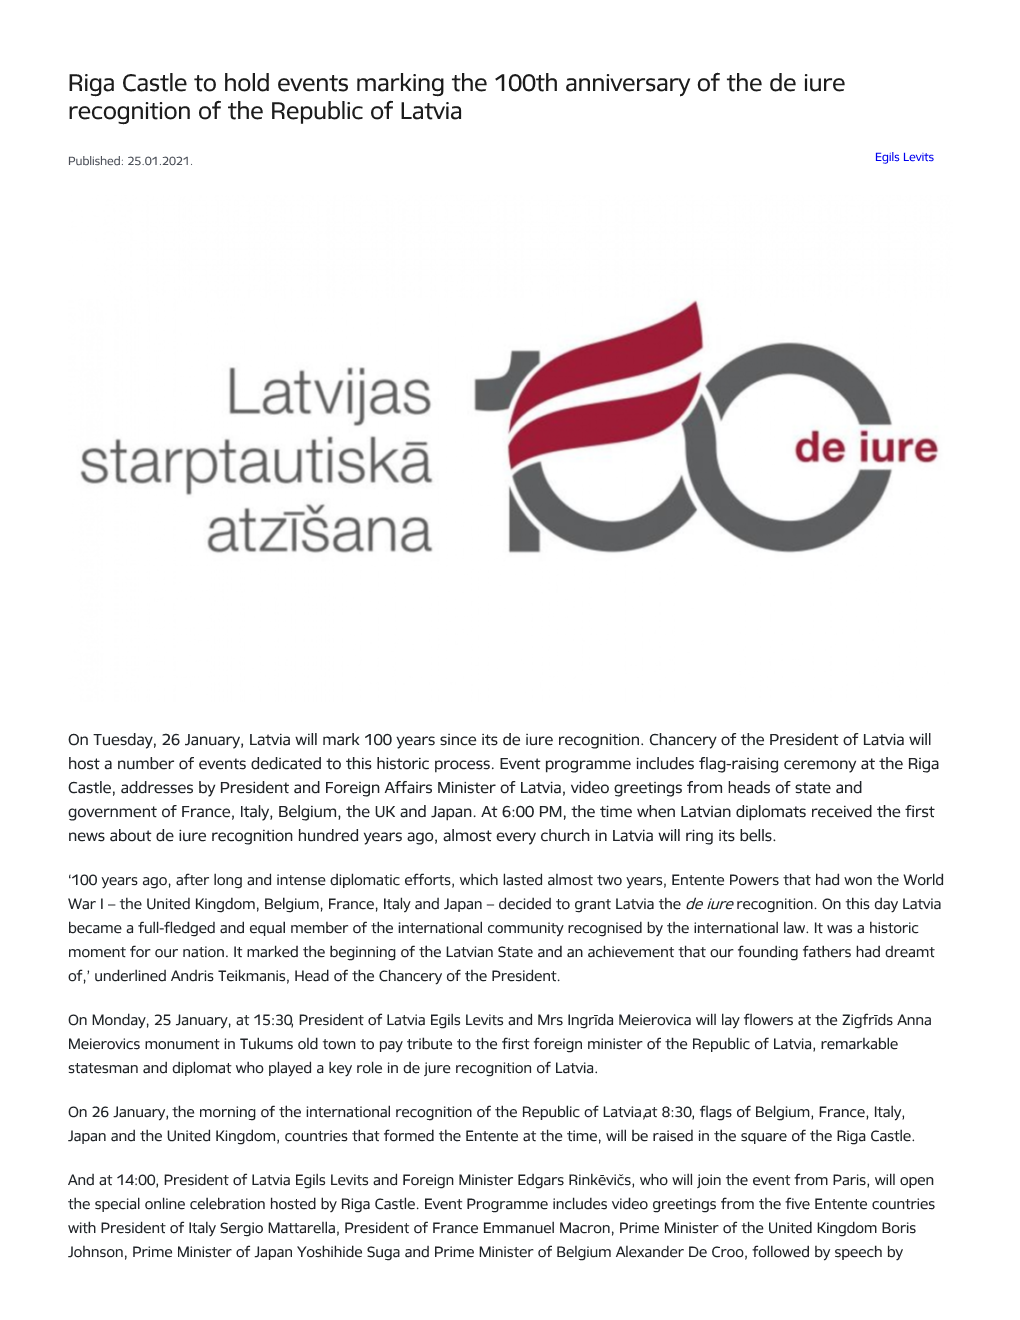 Riga Castle to Hold Events Marking the 100Th Anniversary of the De Iure Recognition of the Republic of Latvia